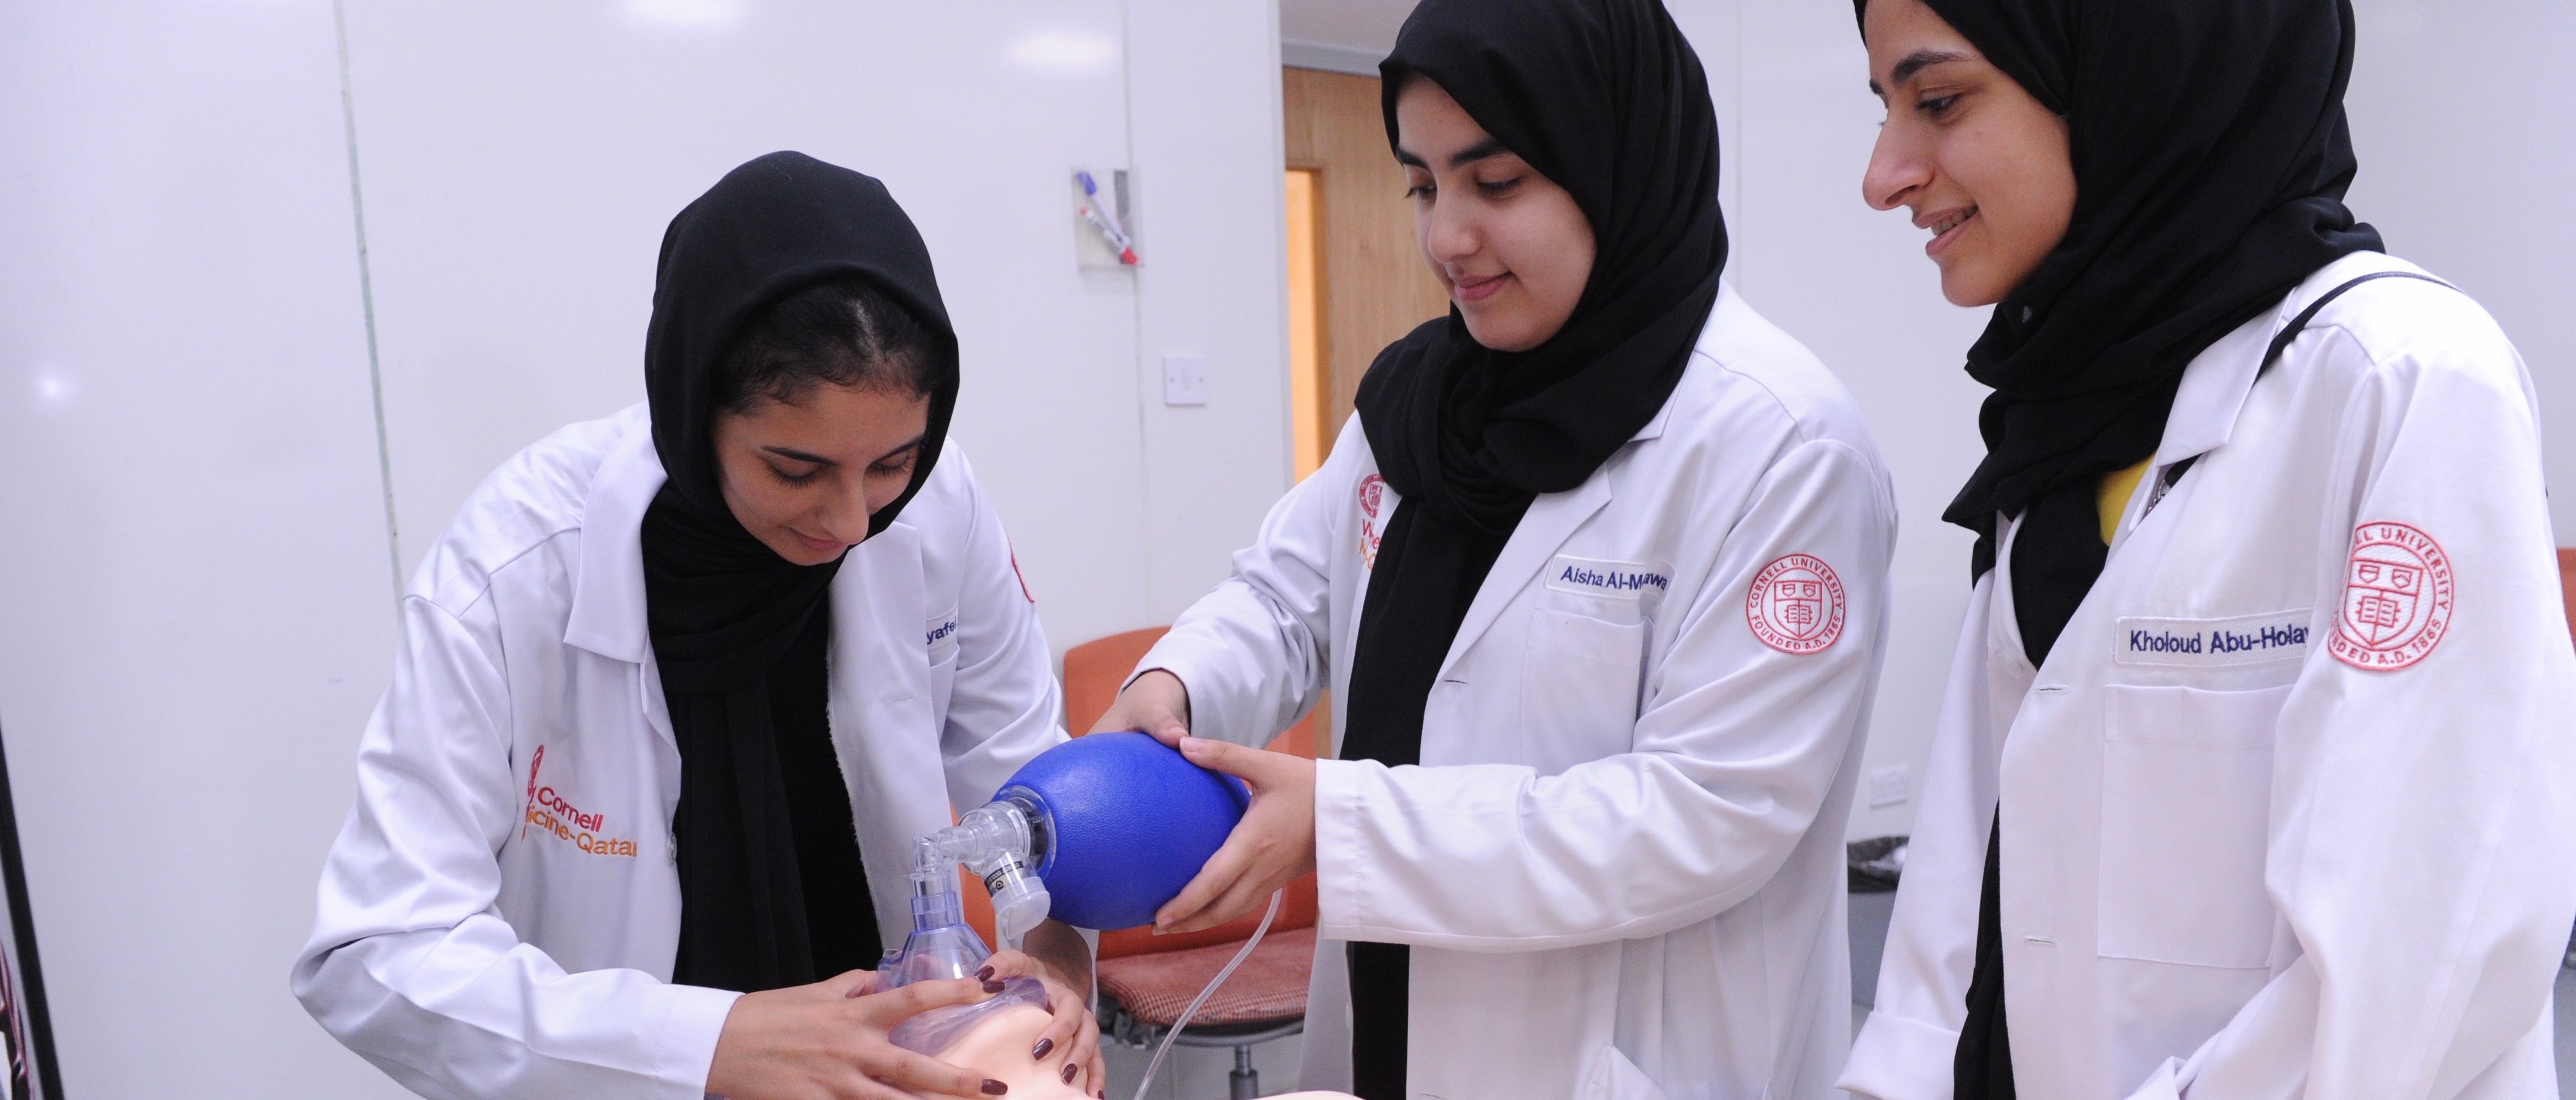 First-year students get to grips with a bag-valve mask ventilator.